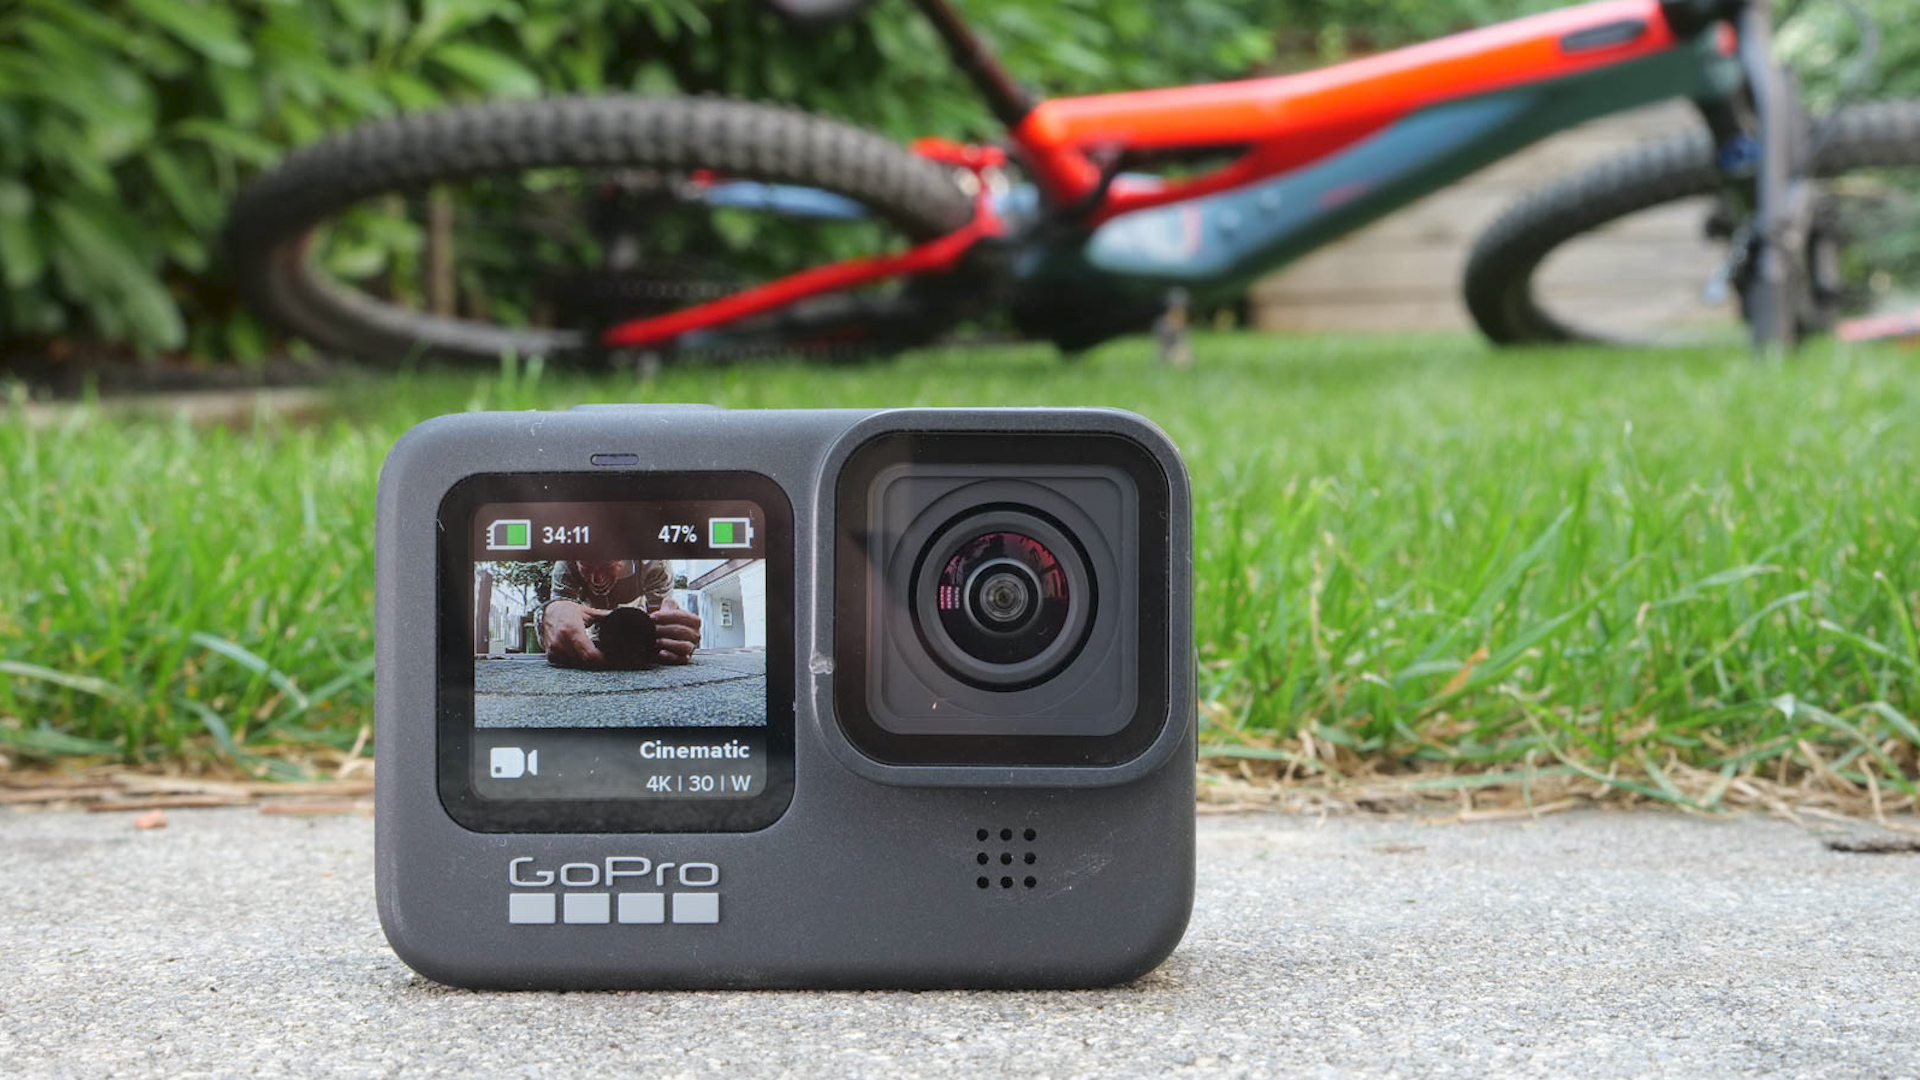 GoPro HERO9 Review - Mountain Biking and Comparison to the HERO8